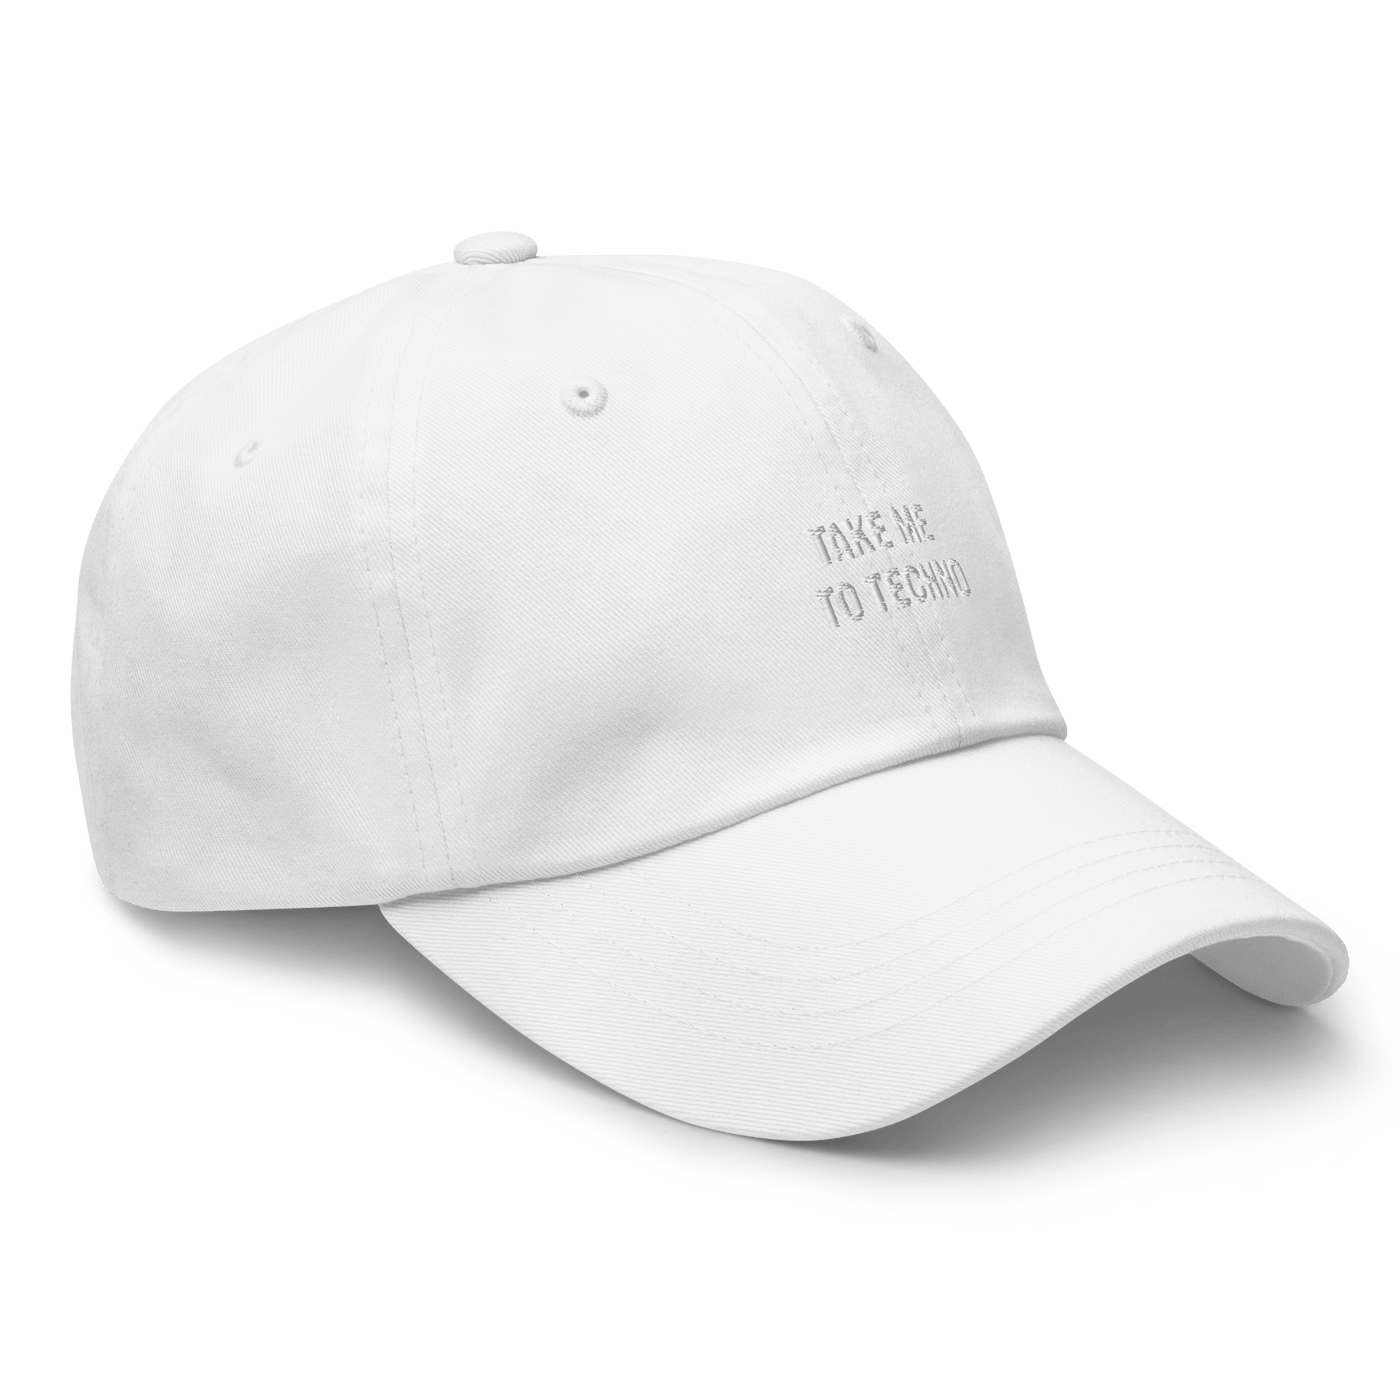 Take me to techno Dad Hat - White - - Just Another Cap Store